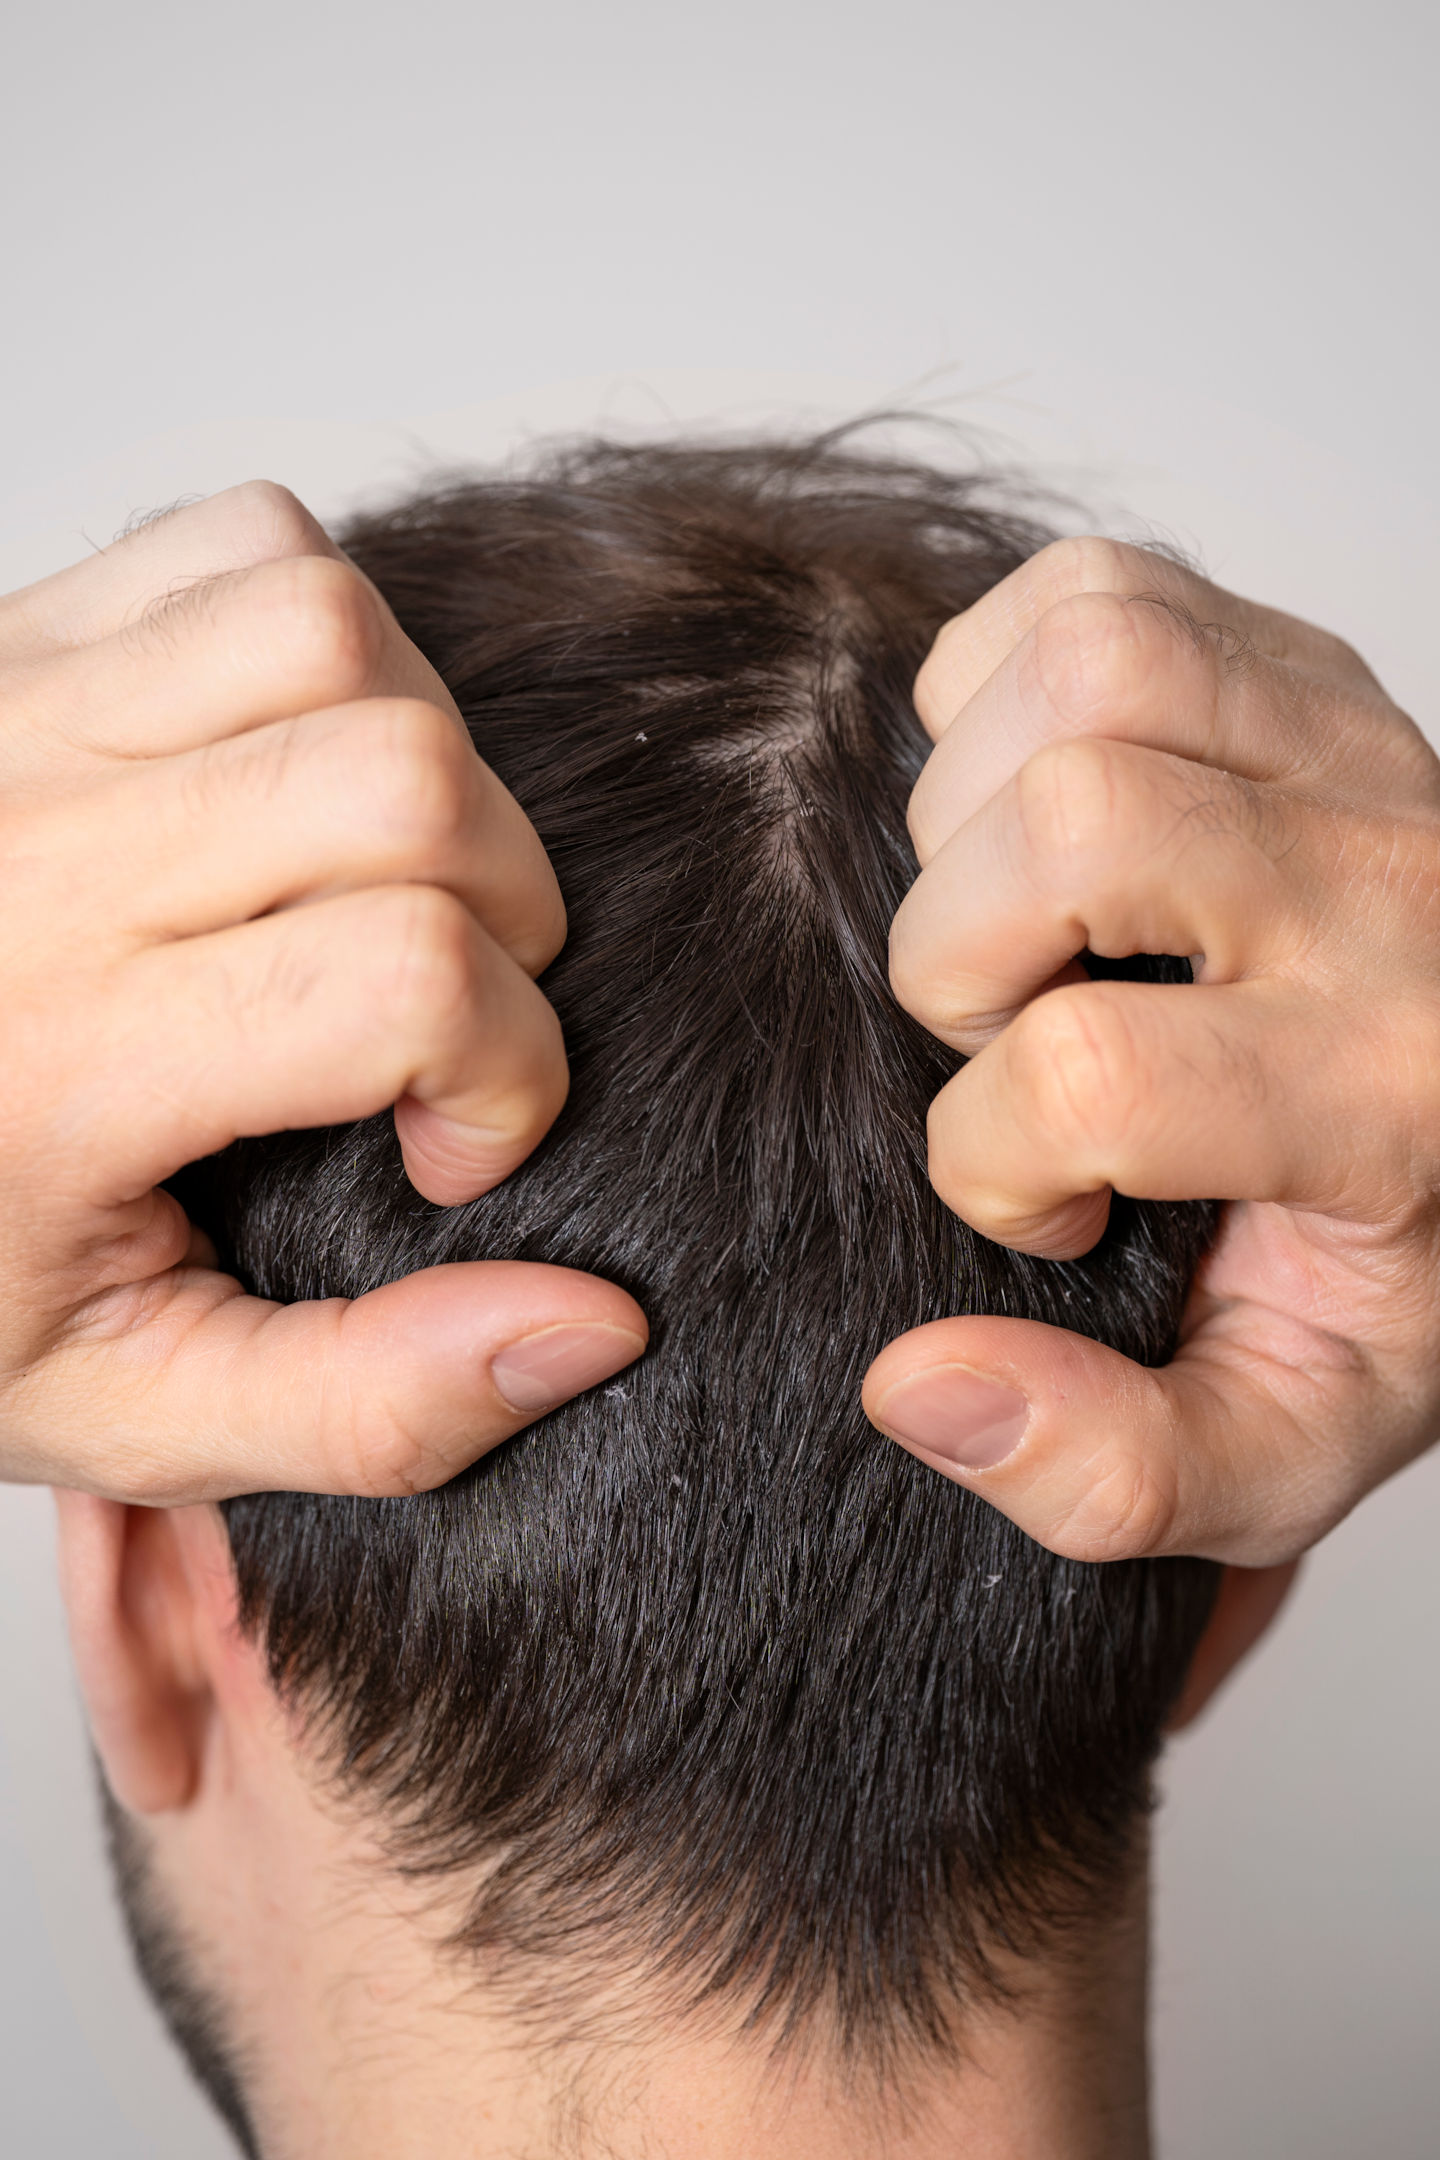 Ketoconazole helps relieve the scalp itching caused by fungal infections.